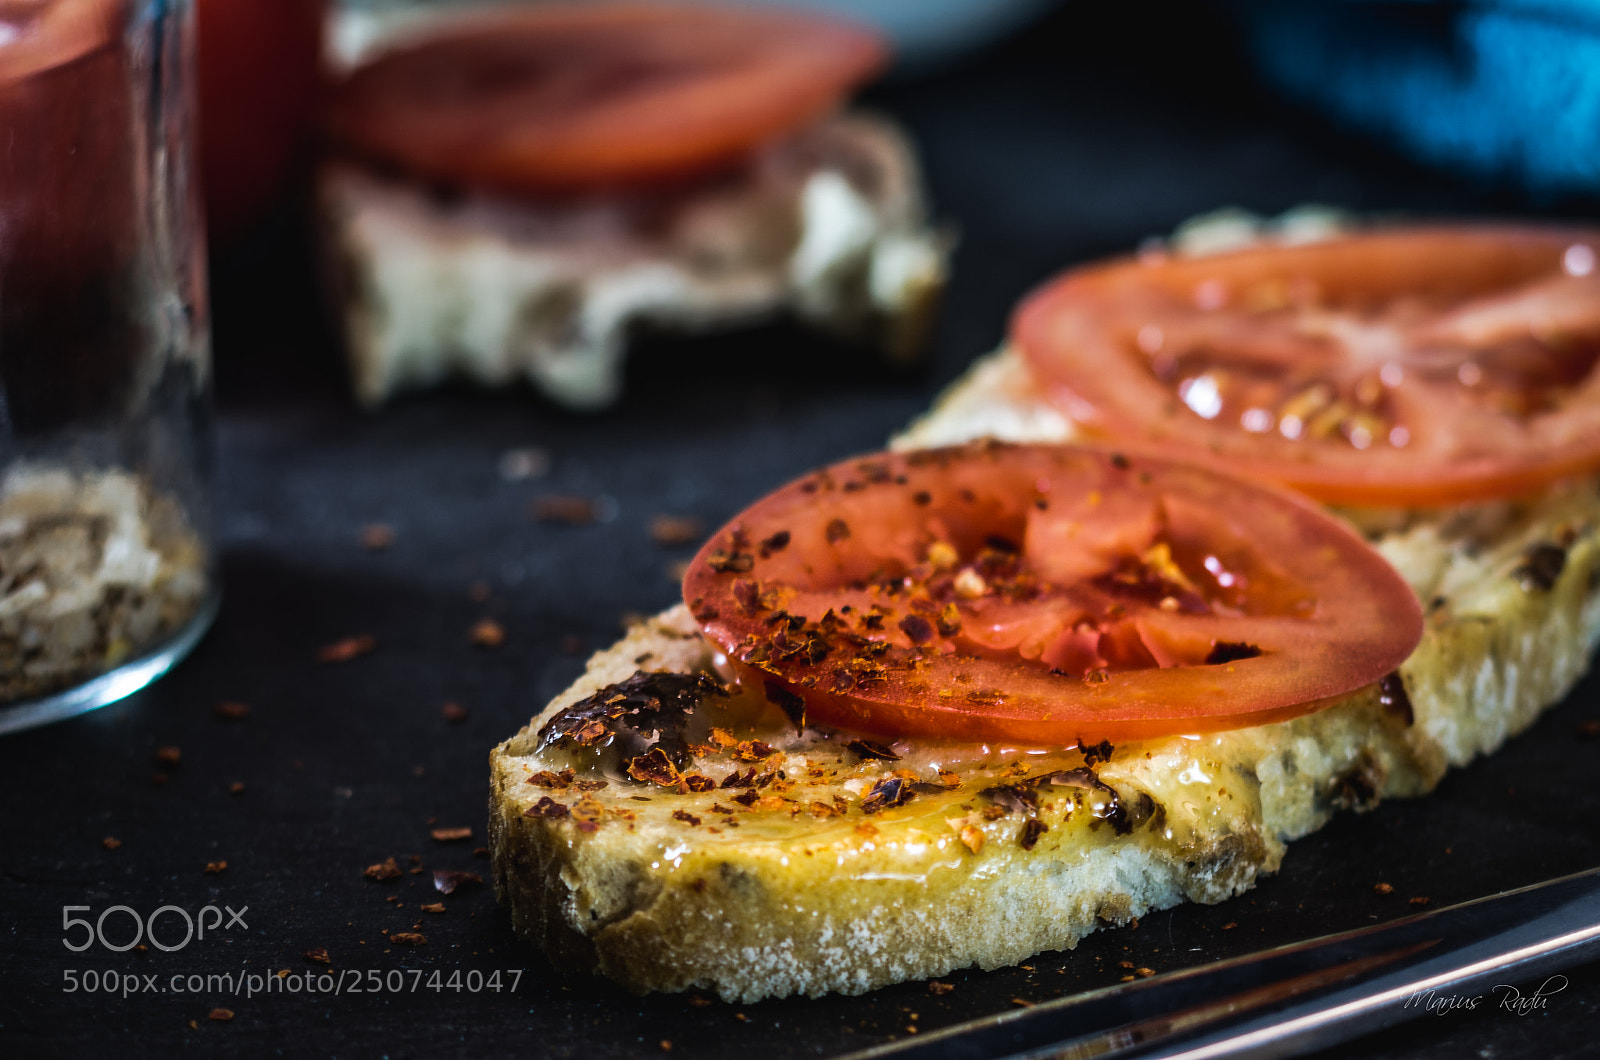 Pentax K-5 sample photo. Bread and tomato photography